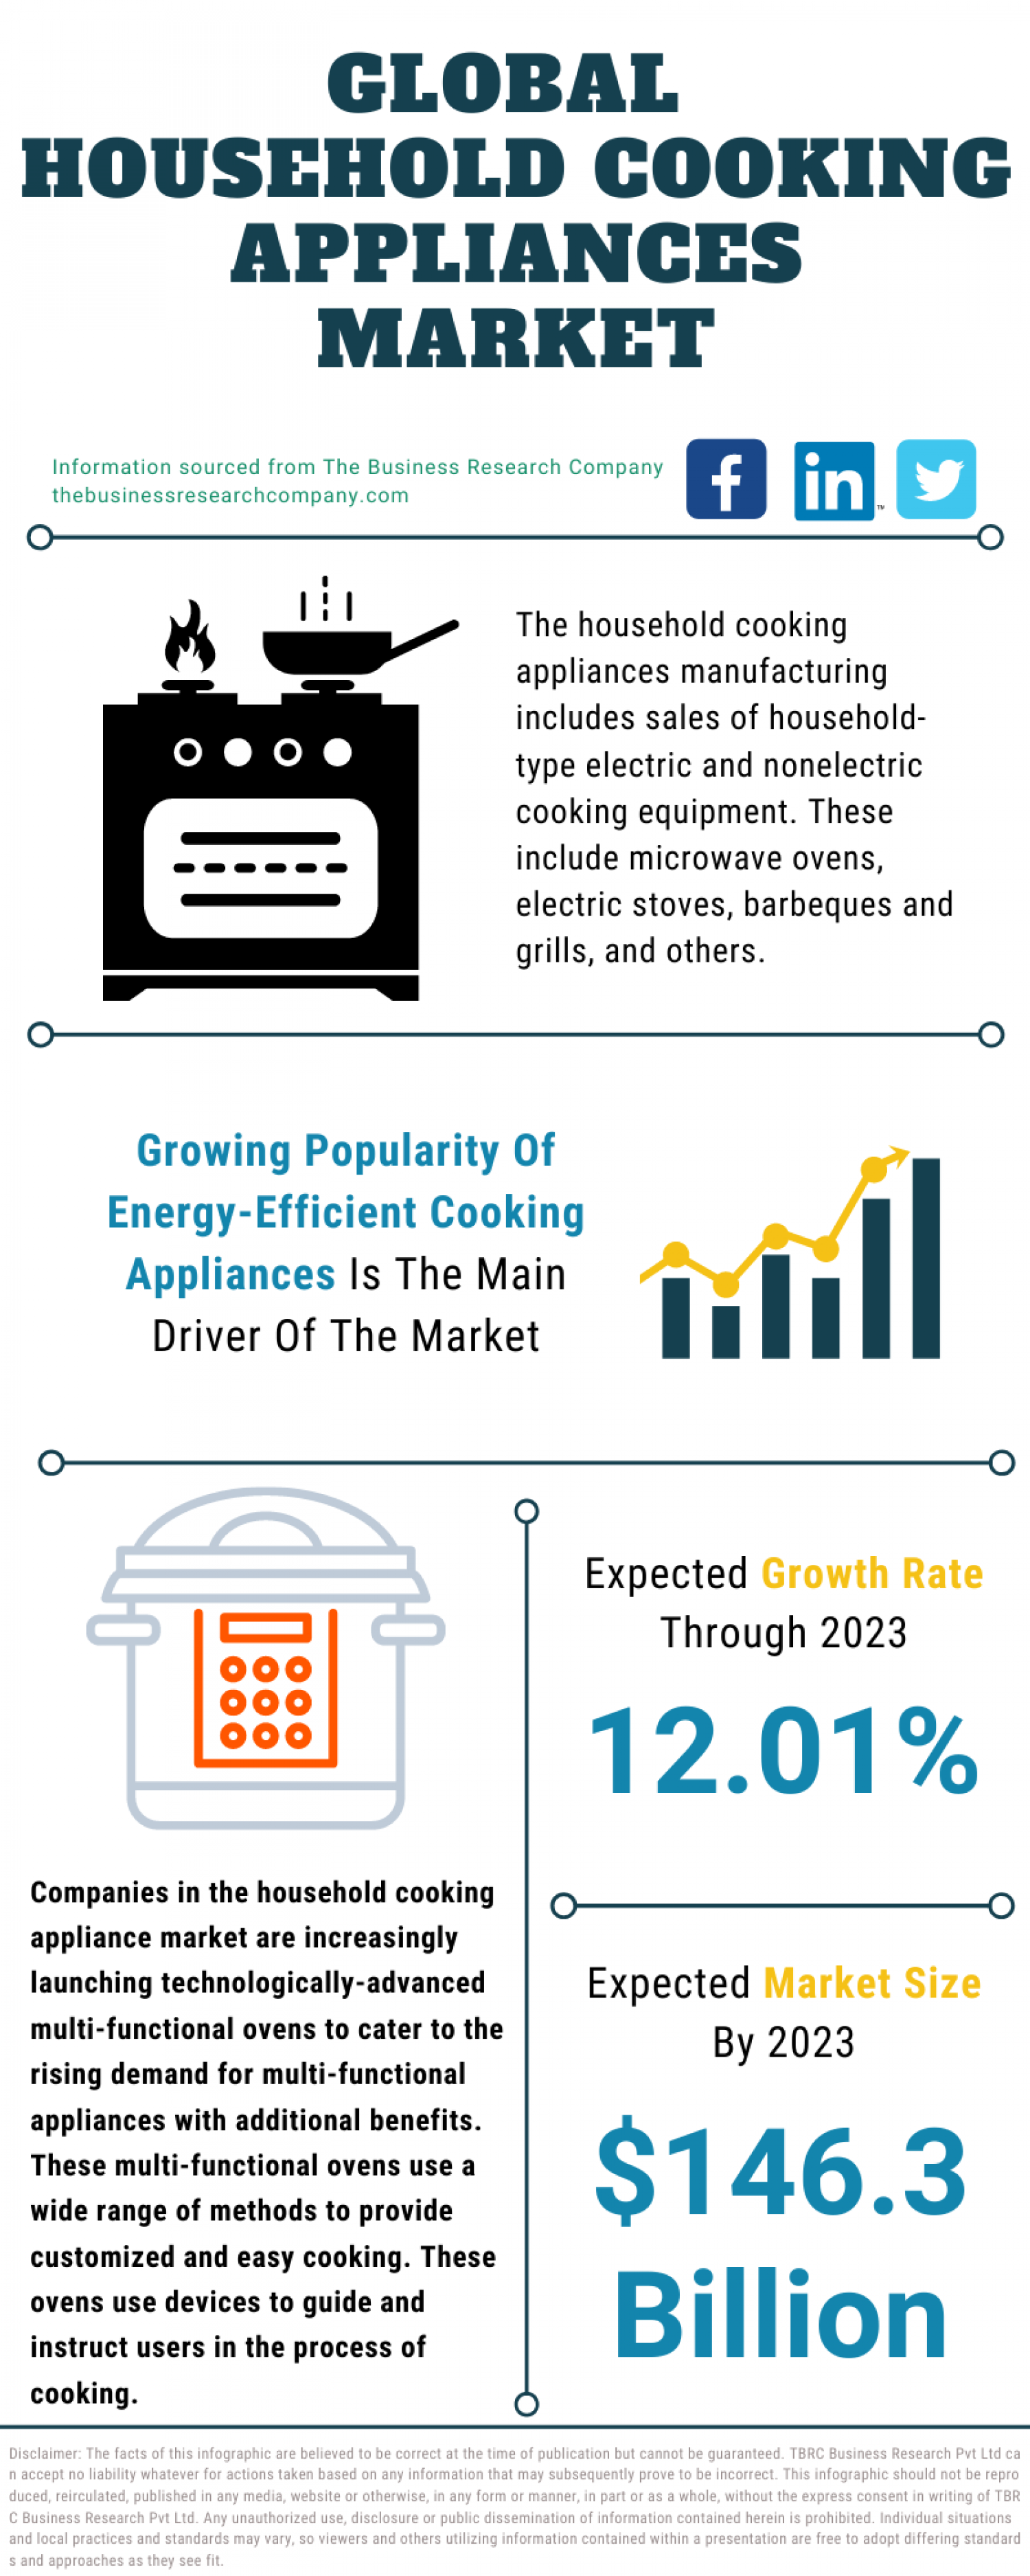 Household Cooking Appliances Market | 2021 - 2030 | Industry Share, Size, Growth Demands Infographic